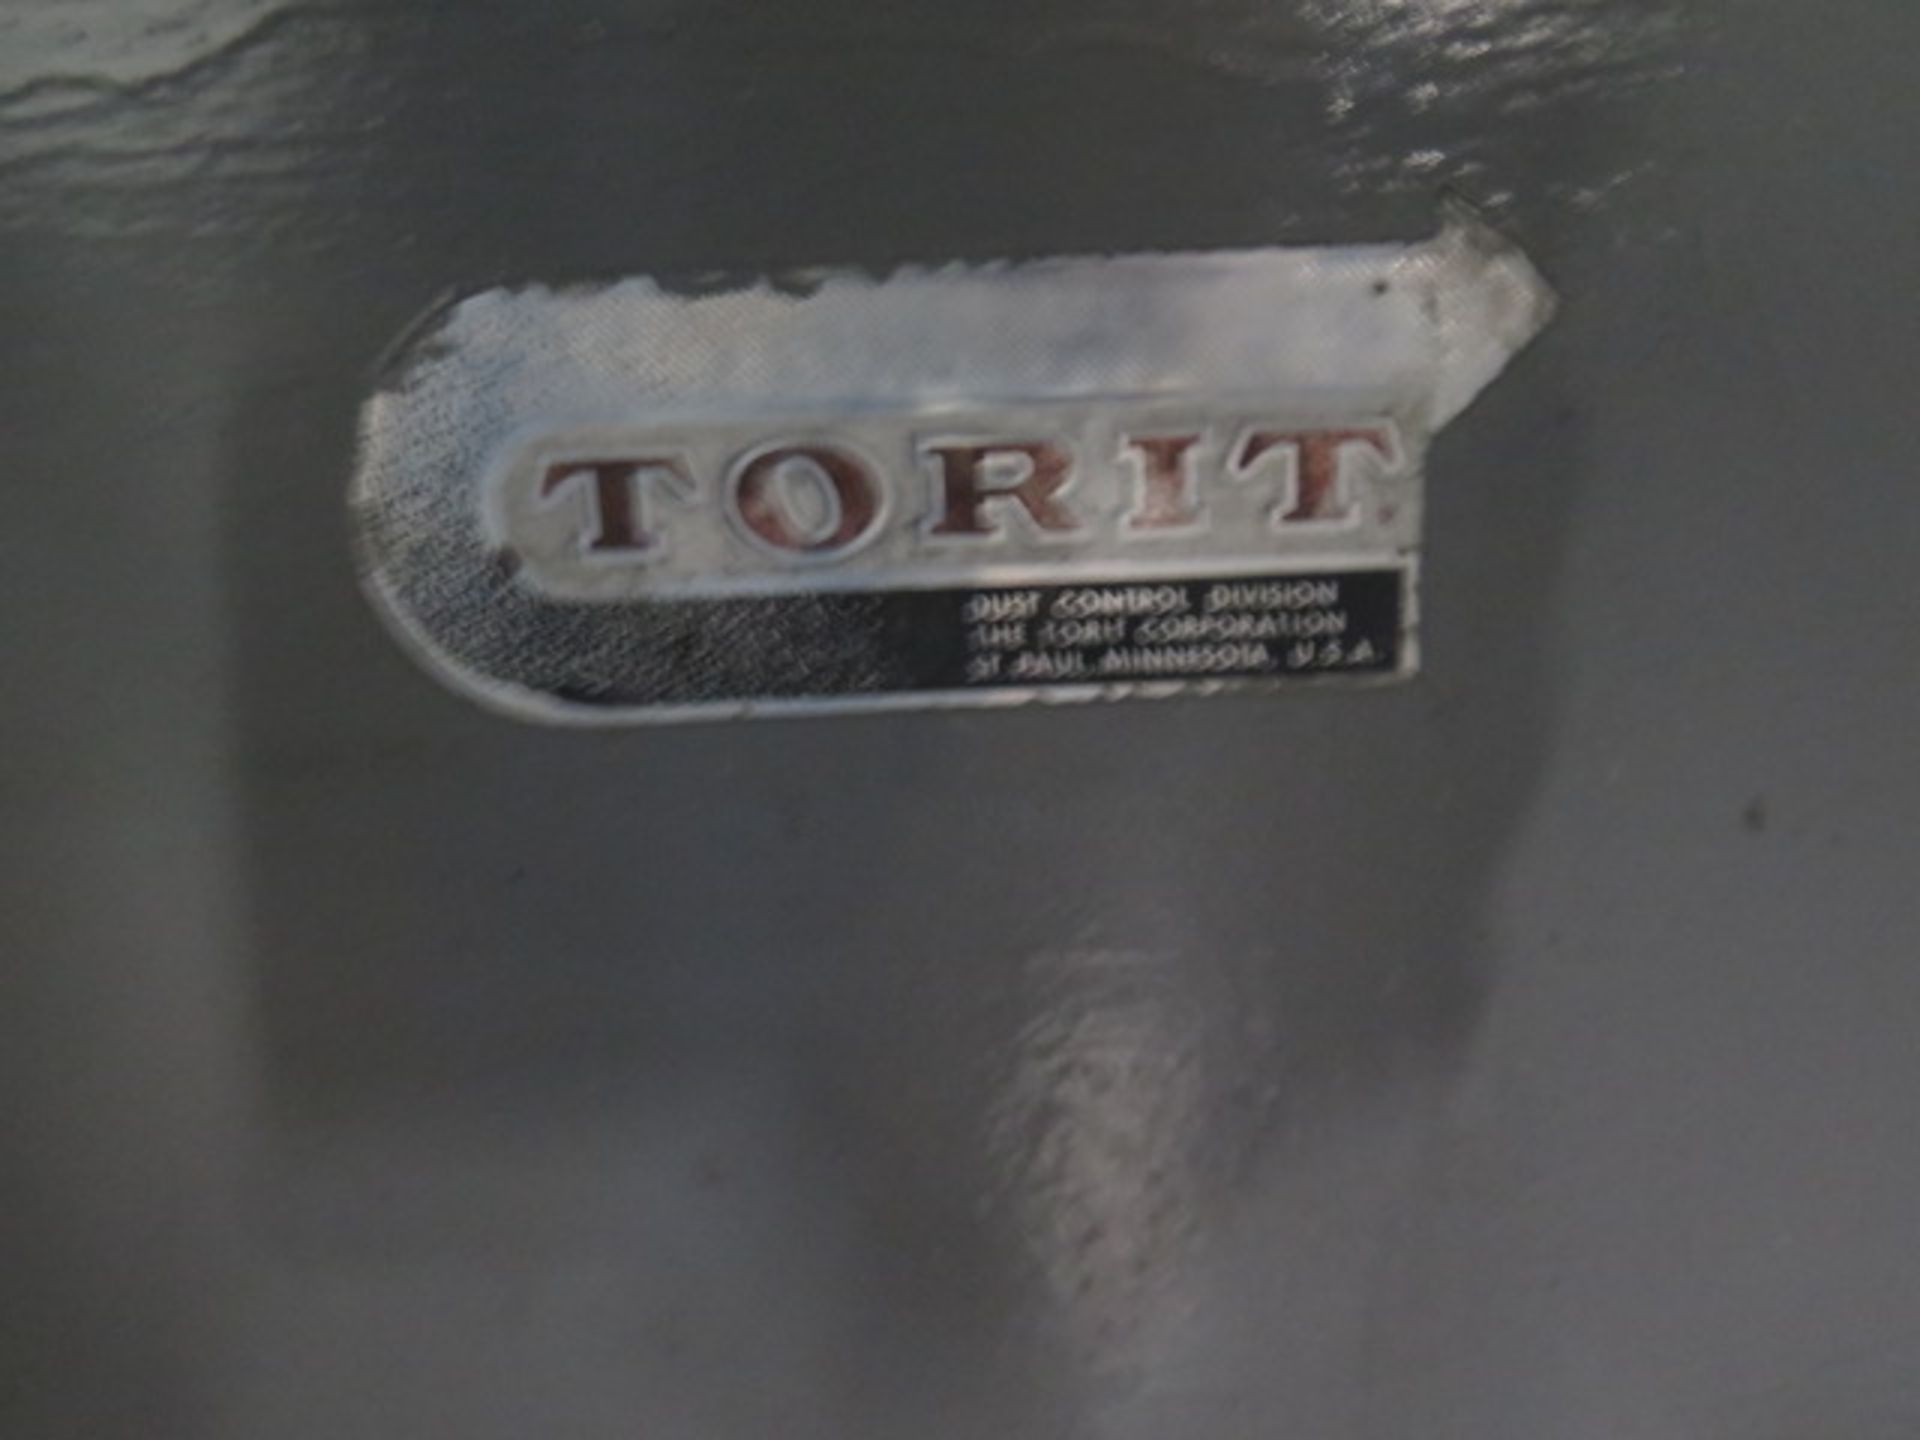 Torit mdl. 64 Dust Collector (SOLD AS-IS - NO WARRANTY) - Image 3 of 4